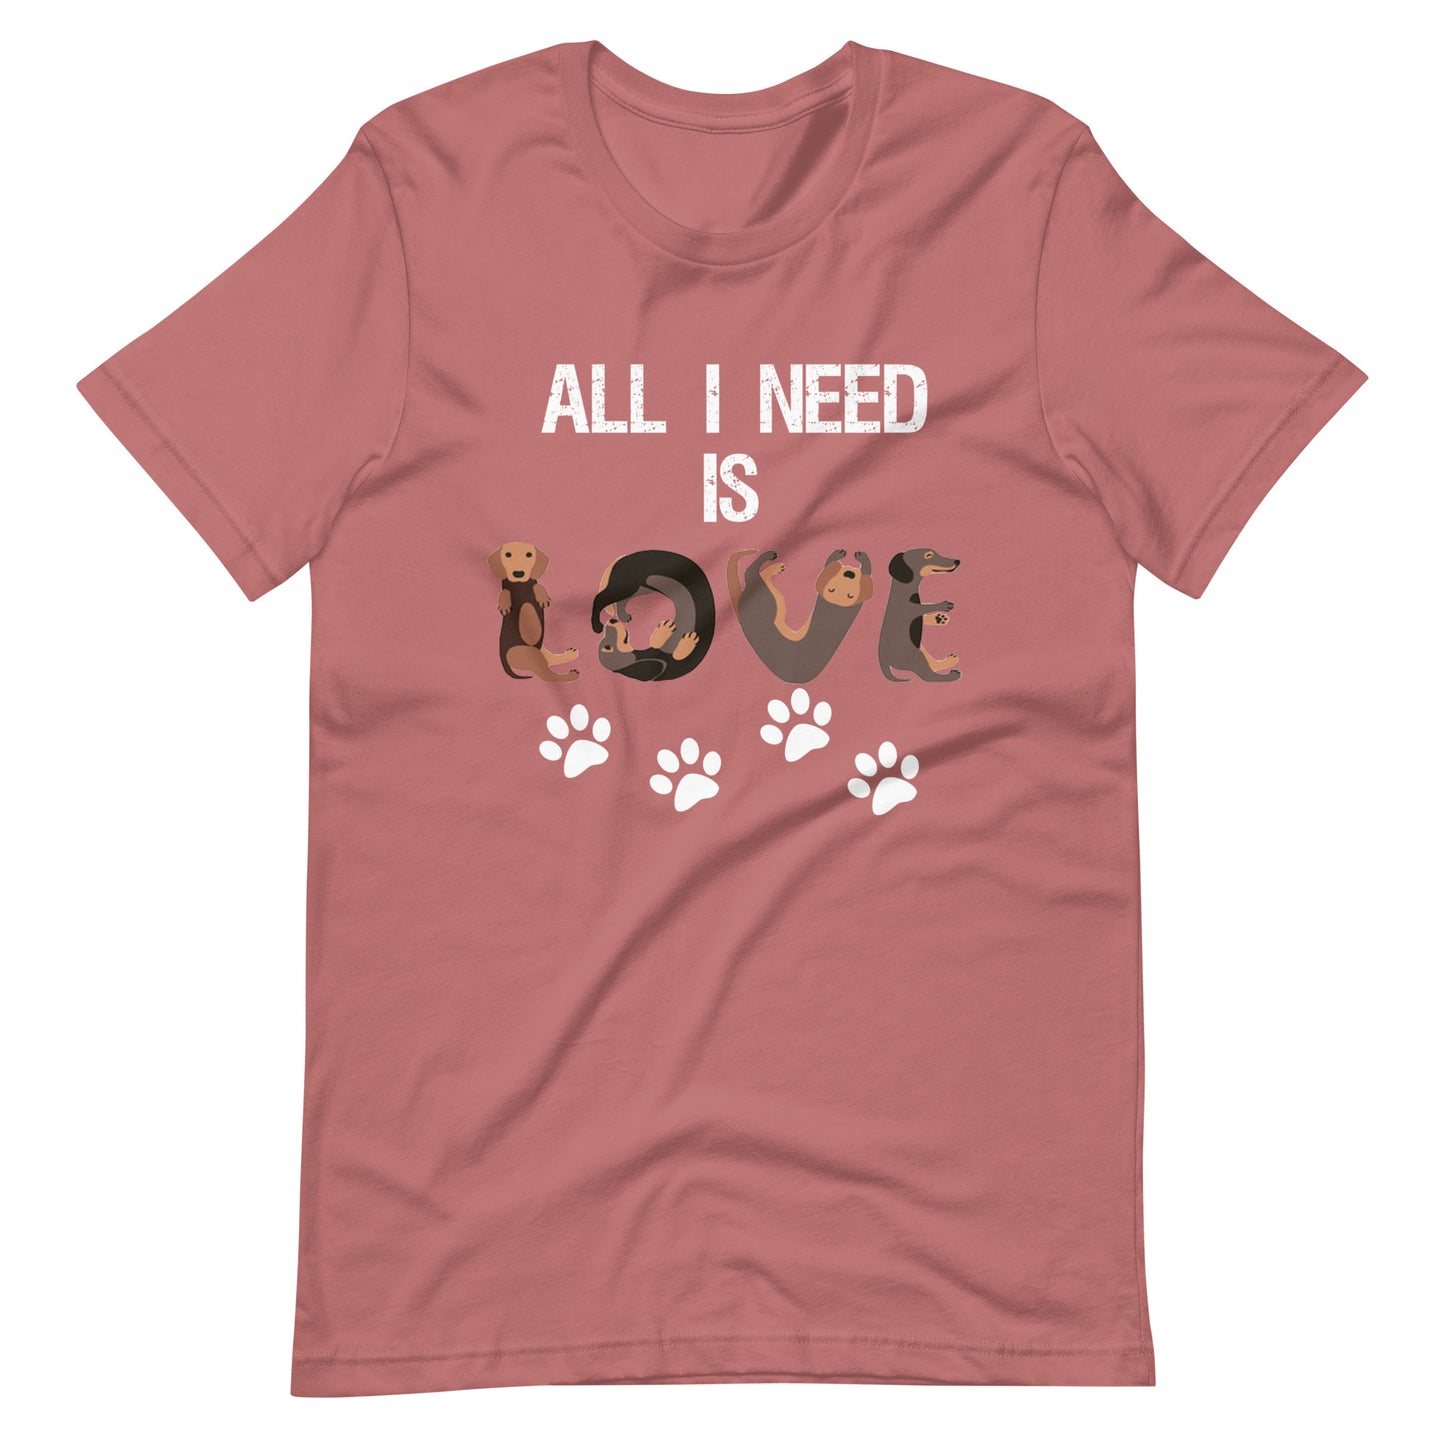 All I Need is Love T-Shirt